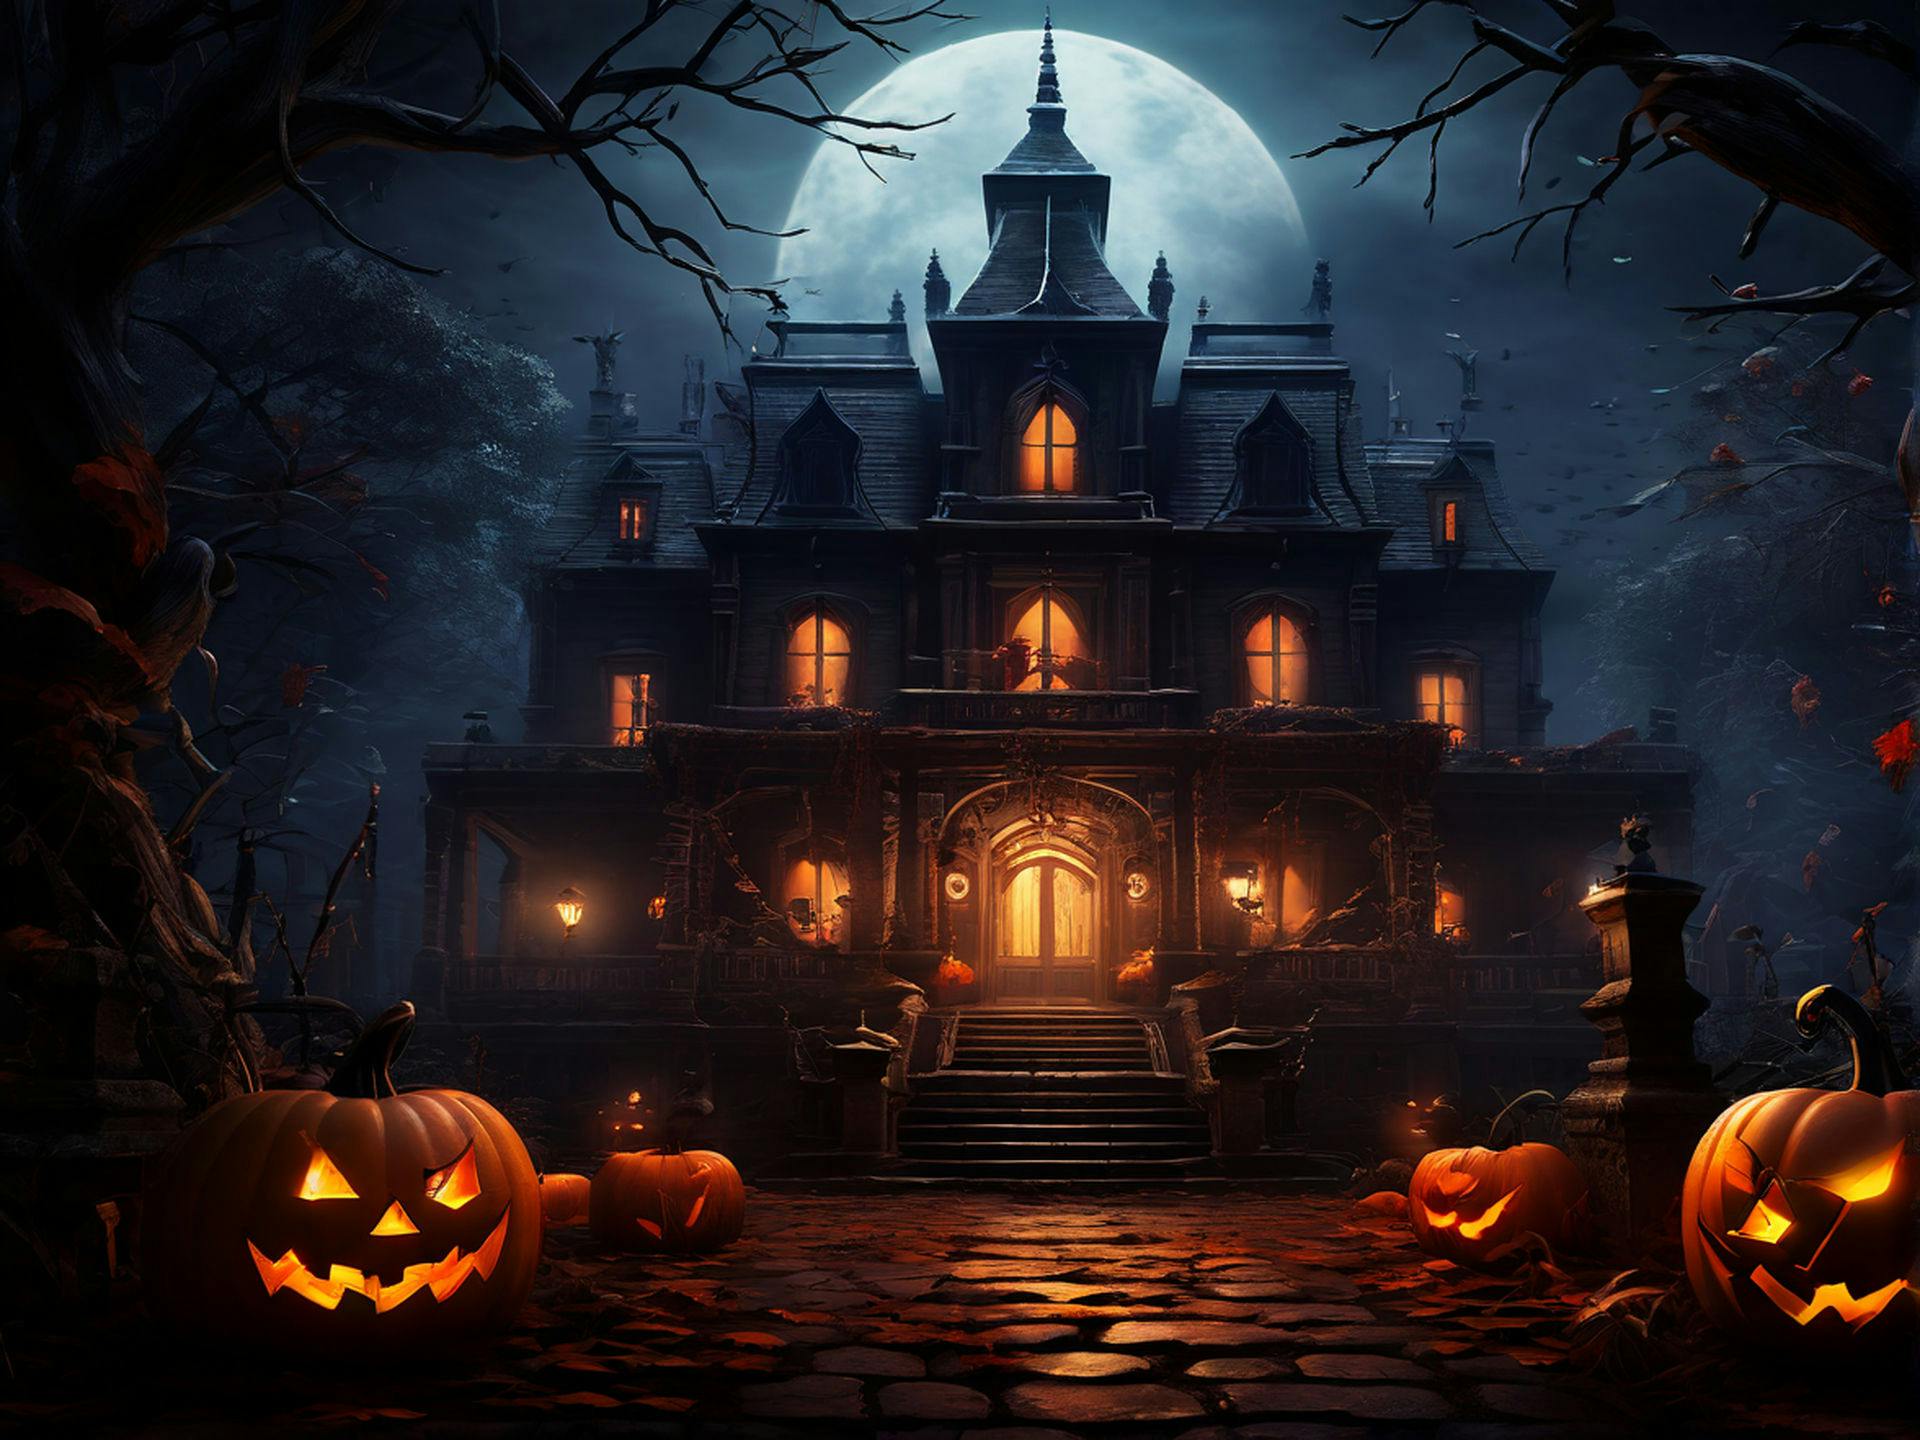 Spooky Halloween Scene with Jack-o'-Lanterns and Haunted Mansion